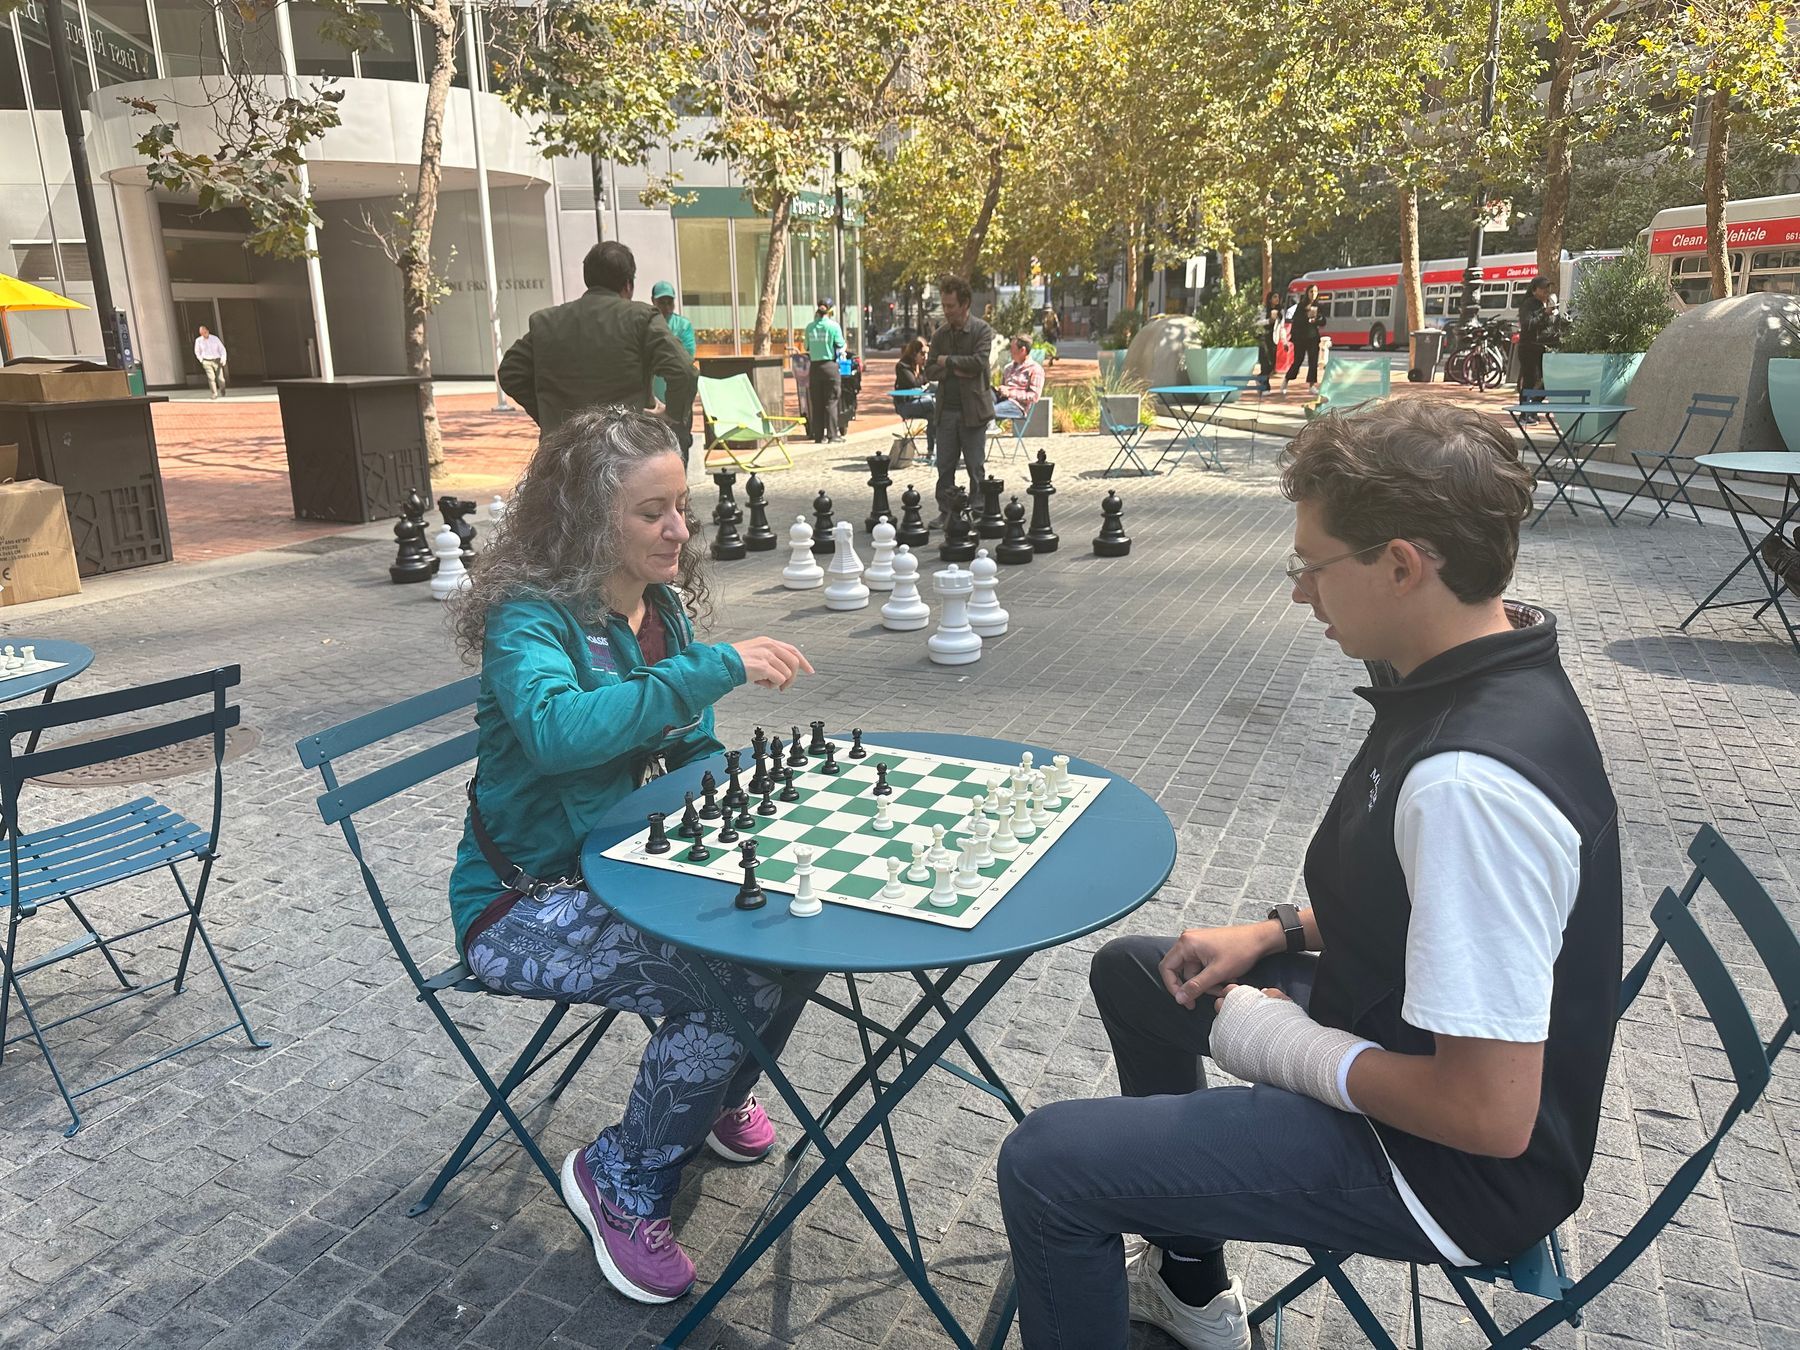 Chess on the Plaza | Downtown San Francisco